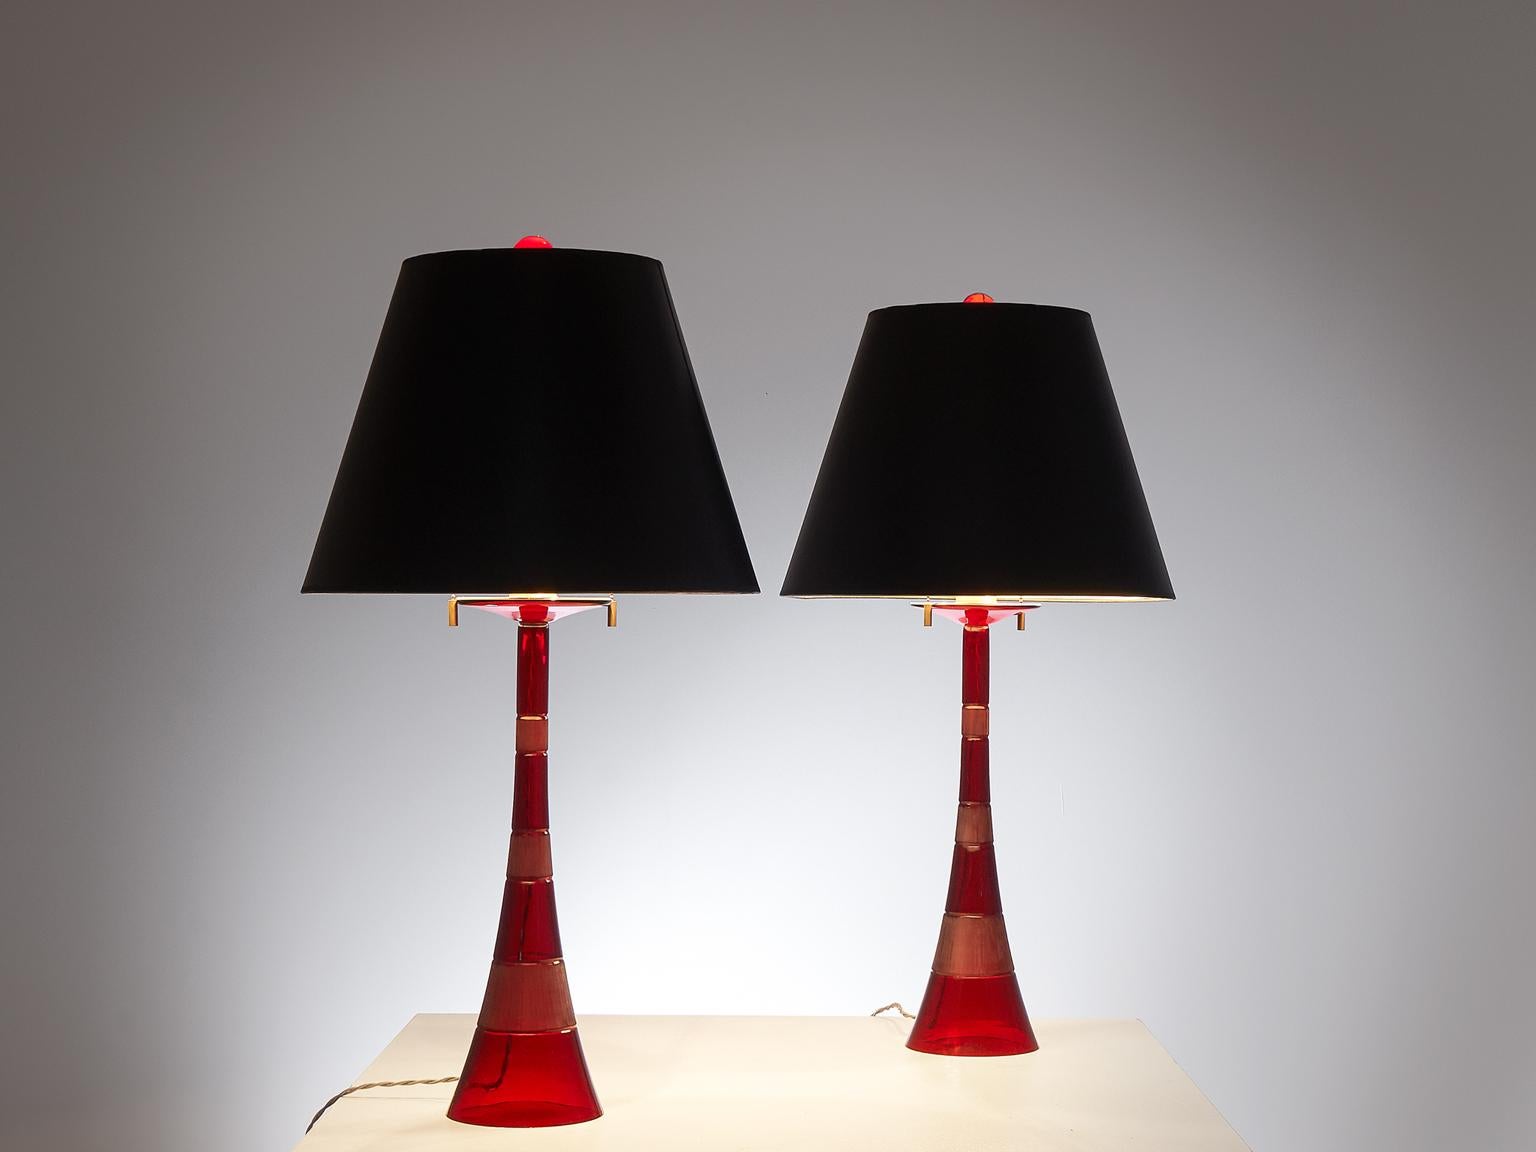 John Hutton for Donghia, pair of table lamps, red glass and acrylic shades, USA, 1980s.

This pair of handblown glass table lamp is designed by John Hutton. It is not often that you come across a pair like this. They are built up elegantly, wider